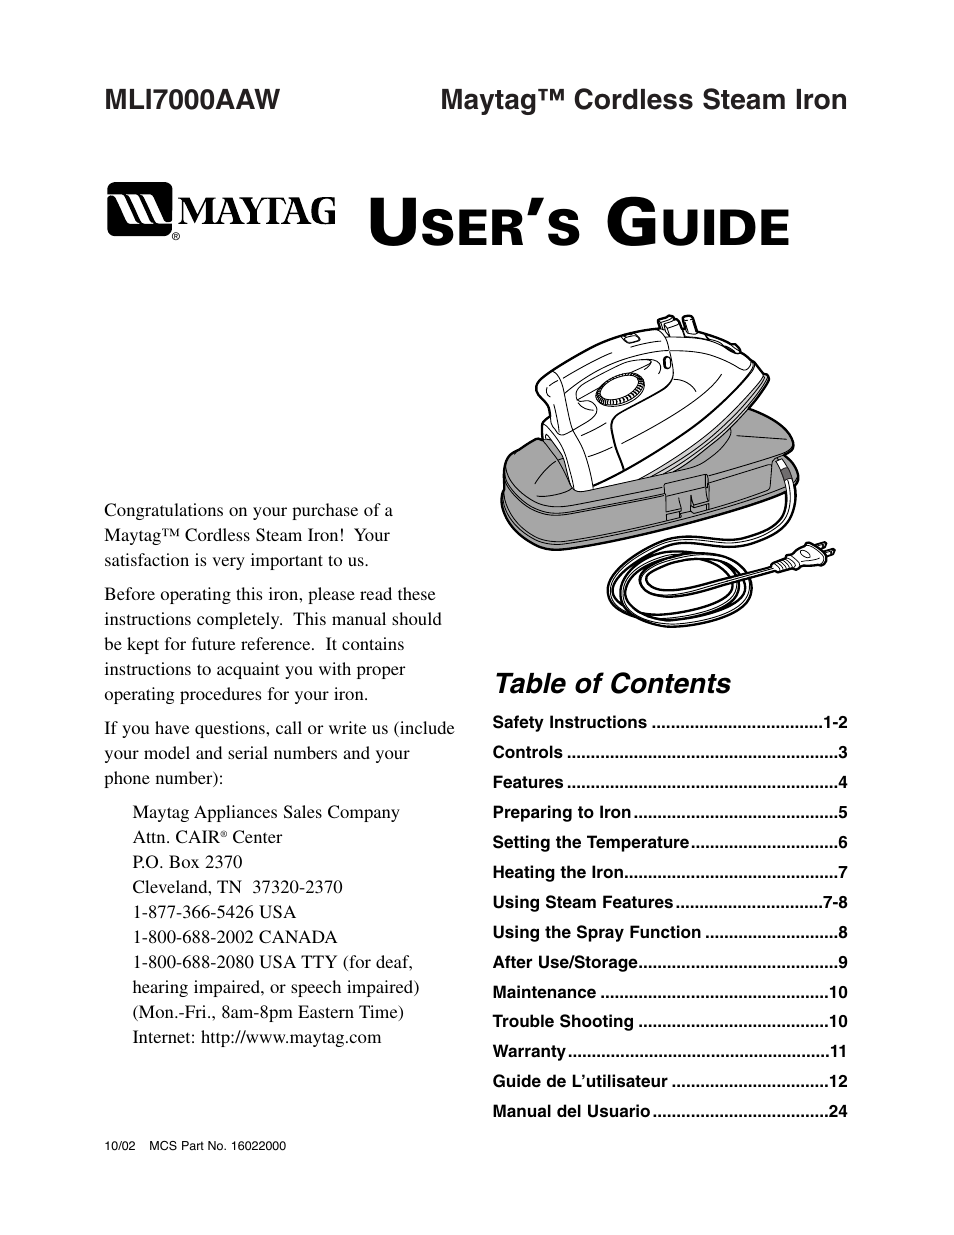 Maytag MLI7000AAW User Manual | 36 pages